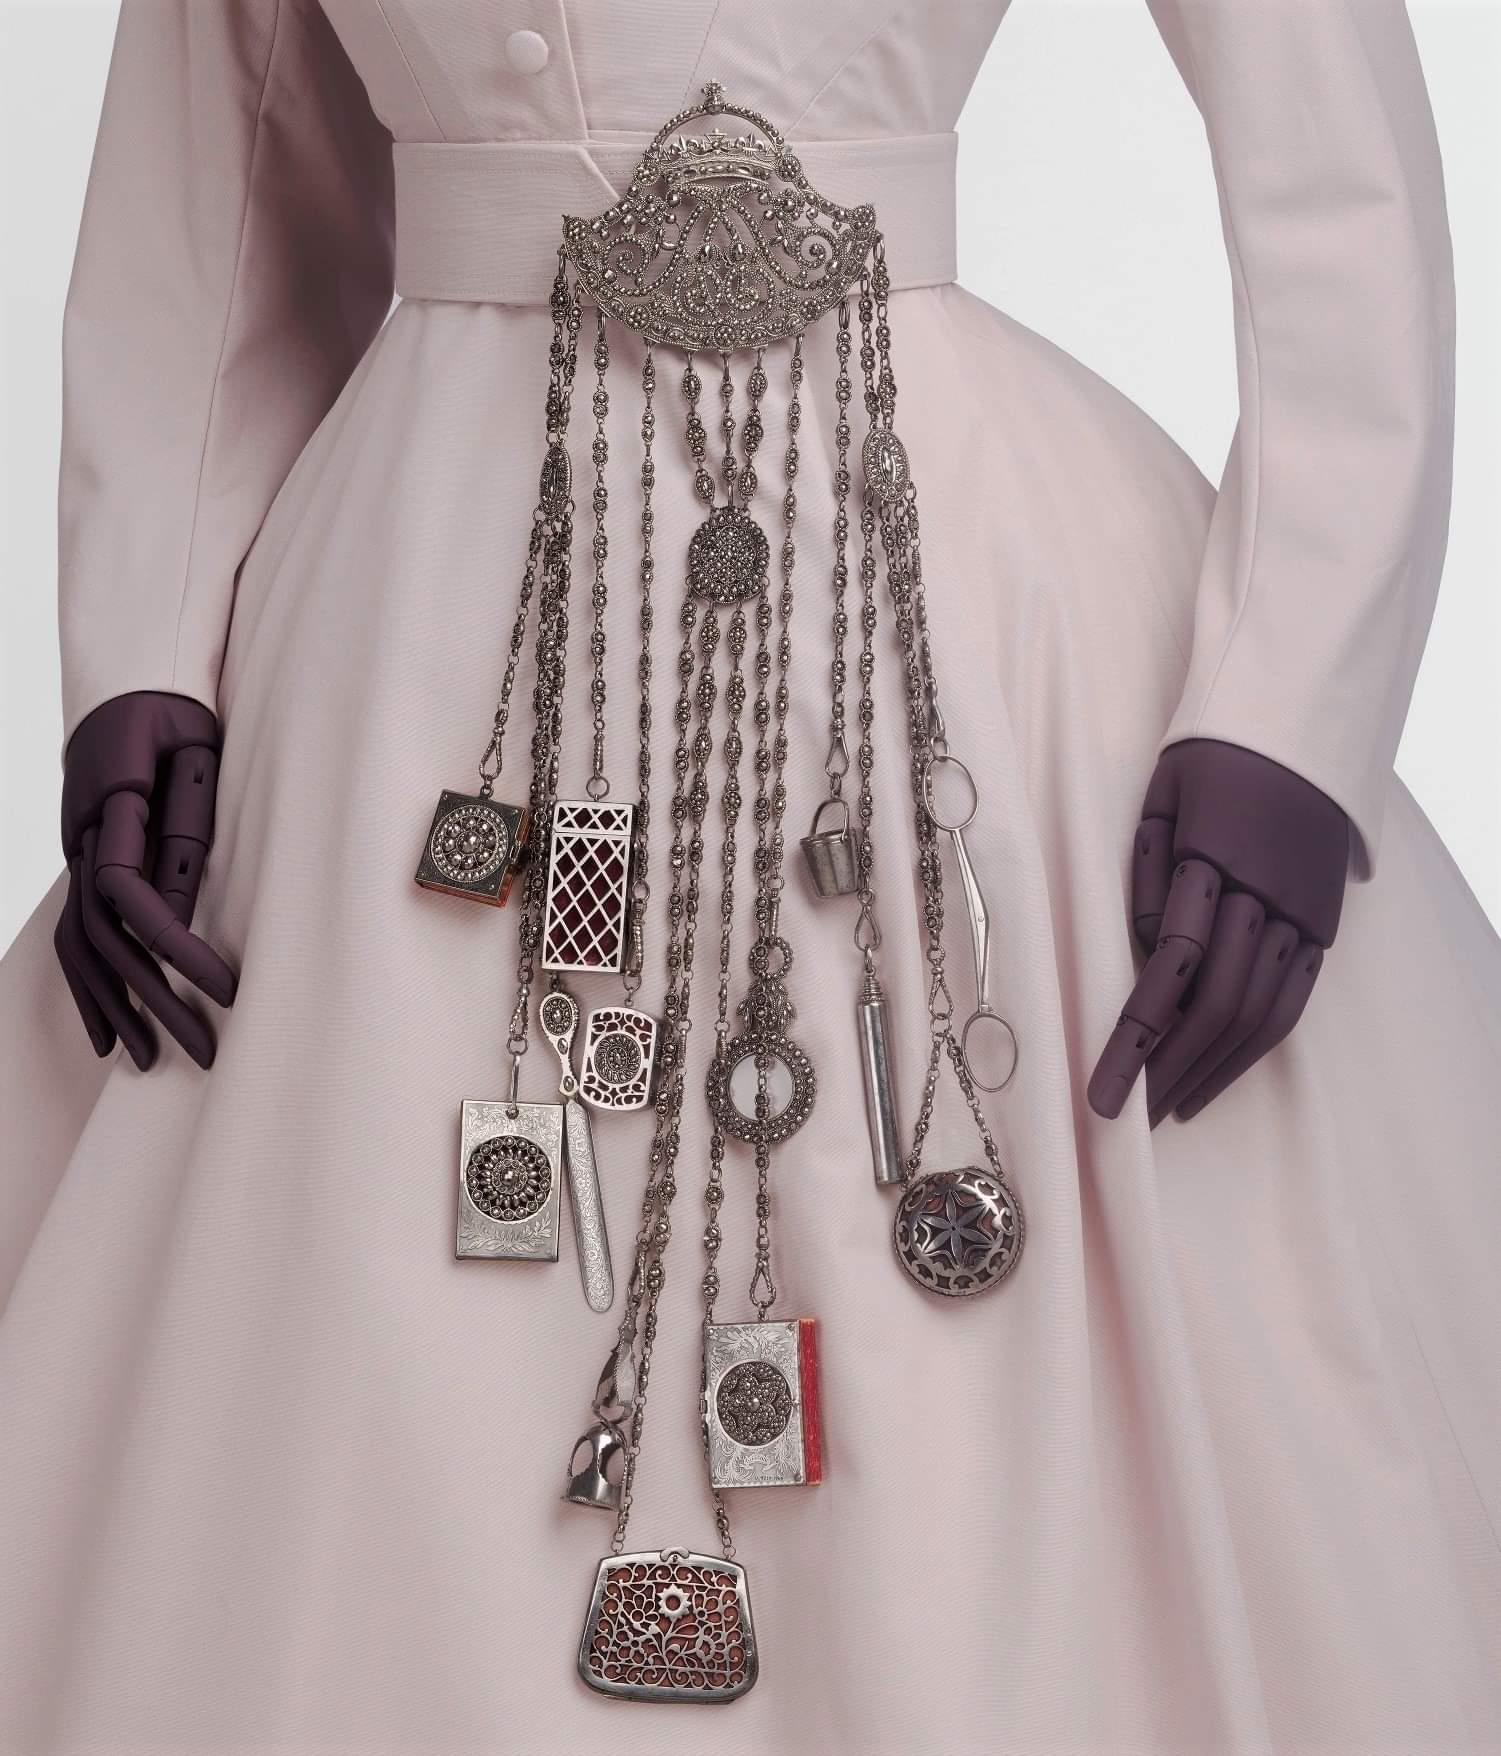 A chatelaine used by Alexandra, Princess of Wales. It comes with 13 accessories, including scissors, a scent bottle, a magnifying glass and a Notebook. Made in England, 1863-1885 CE.jpeg